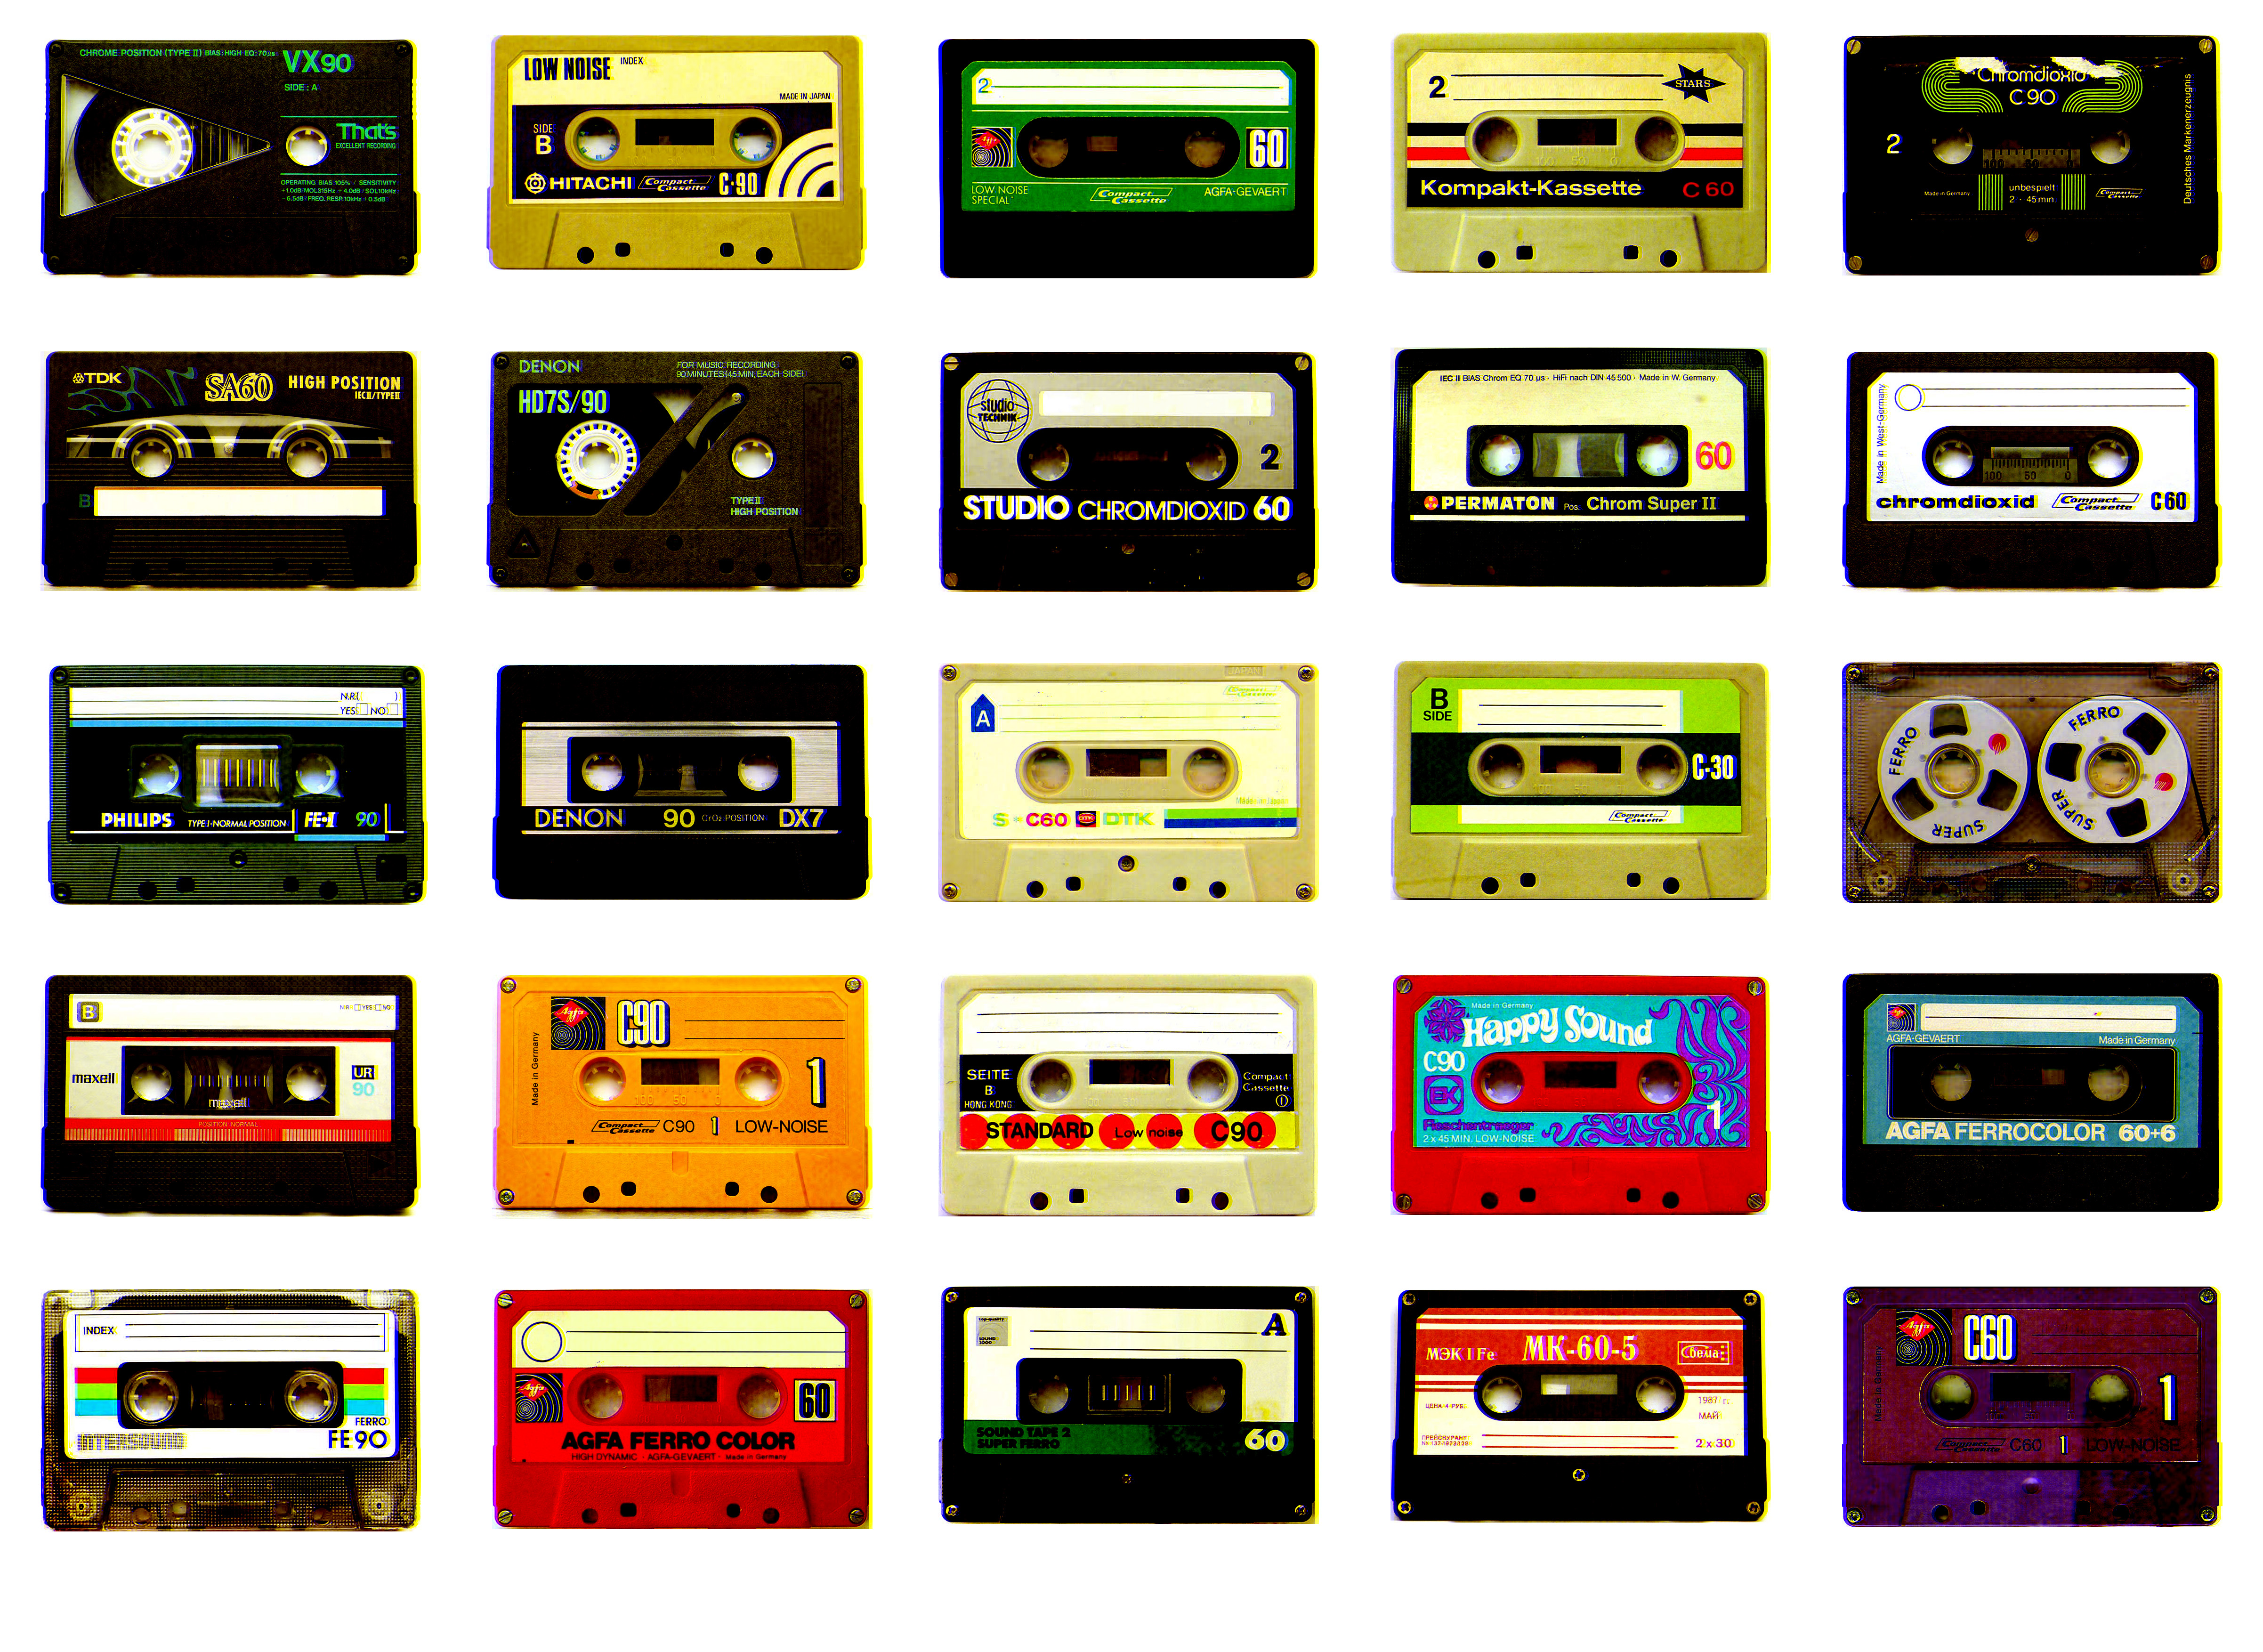 Cassette sales increased by 74% in 2016